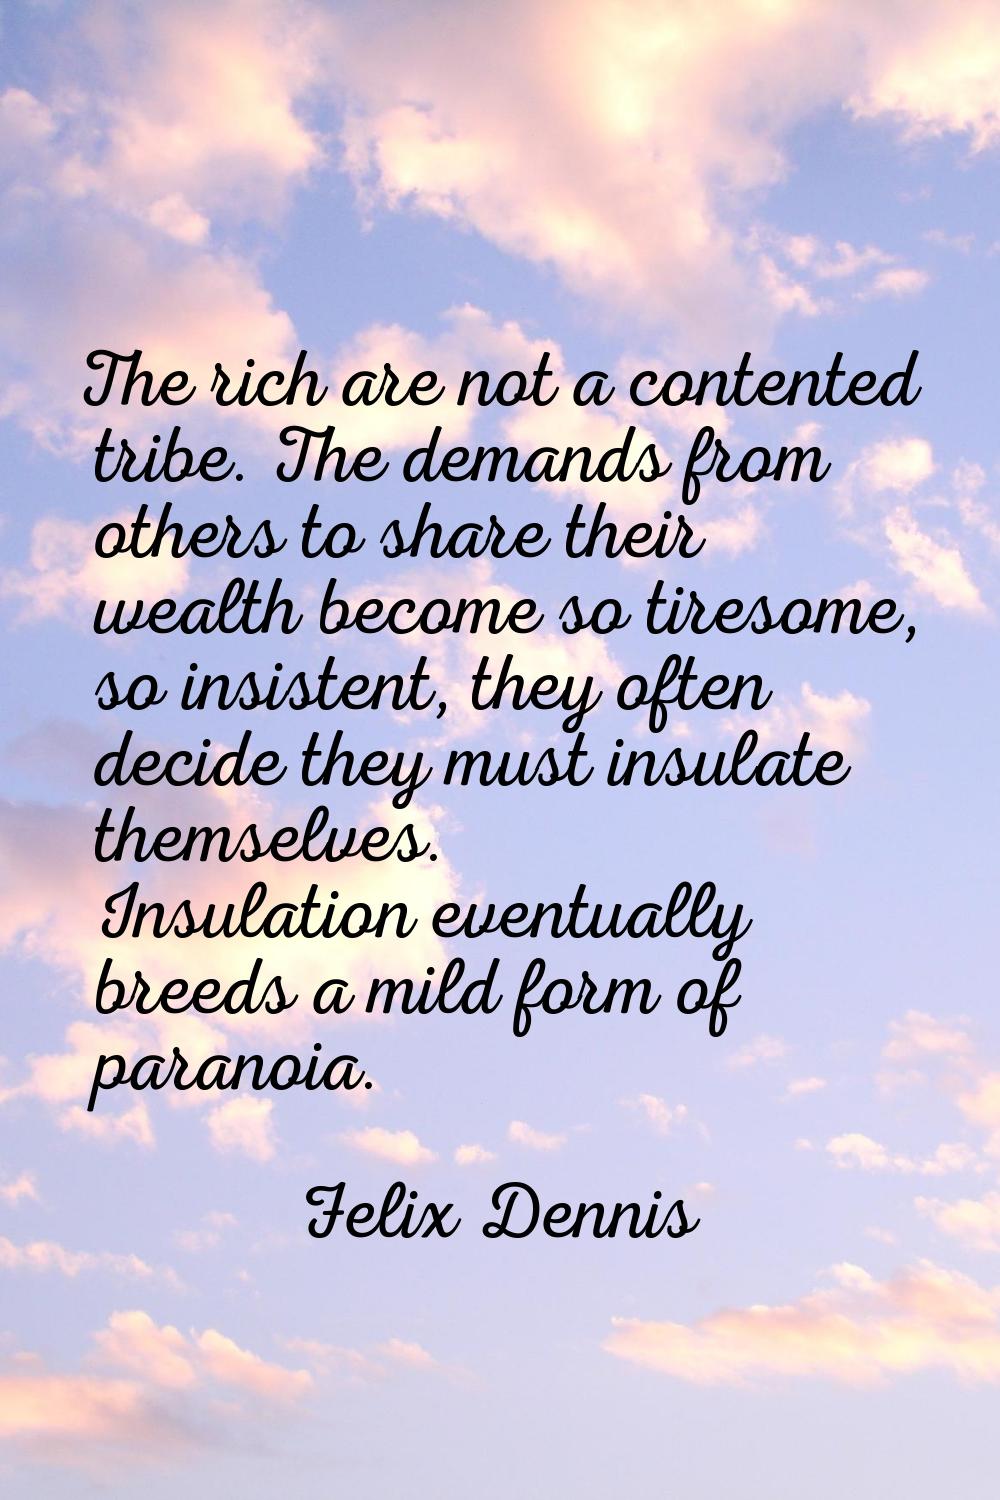 The rich are not a contented tribe. The demands from others to share their wealth become so tiresom